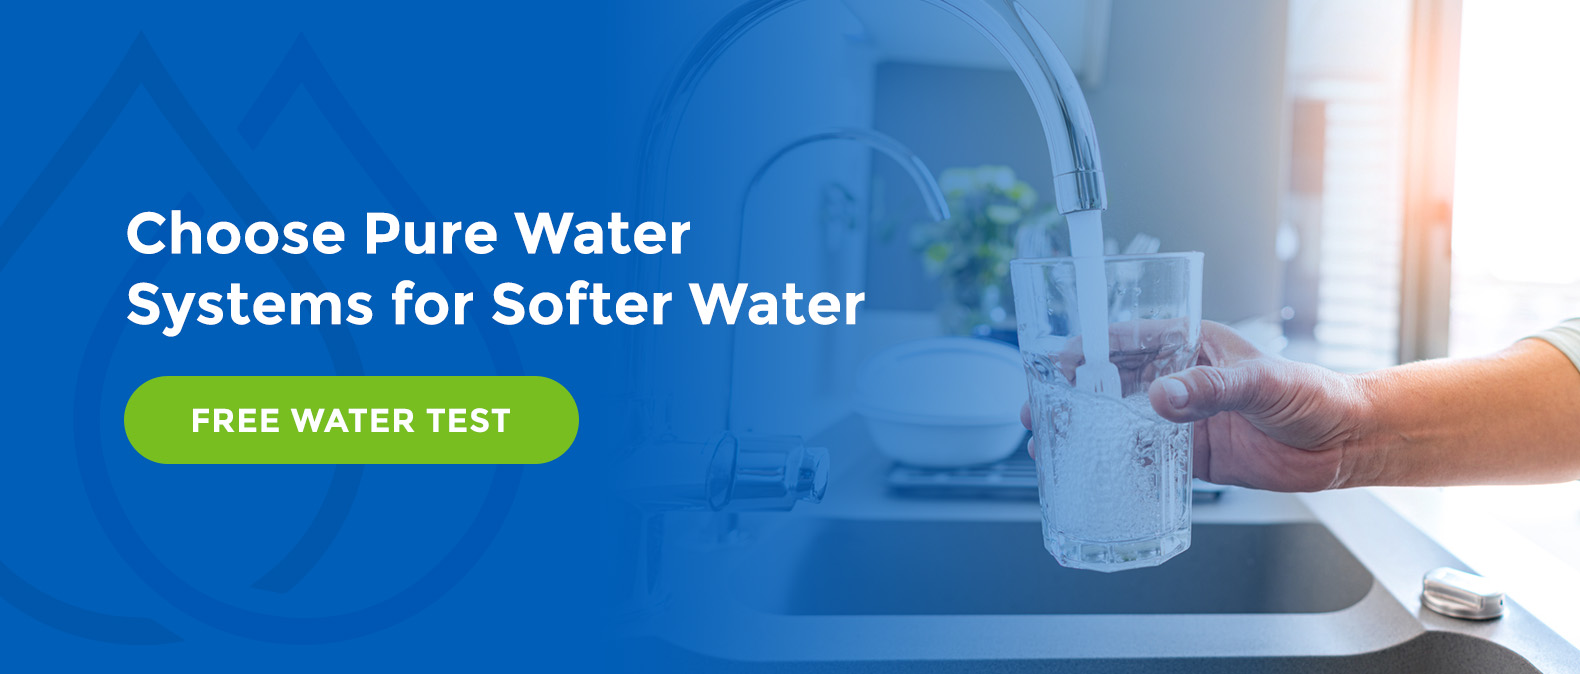 Choose Pure Water Systems for Softer Water